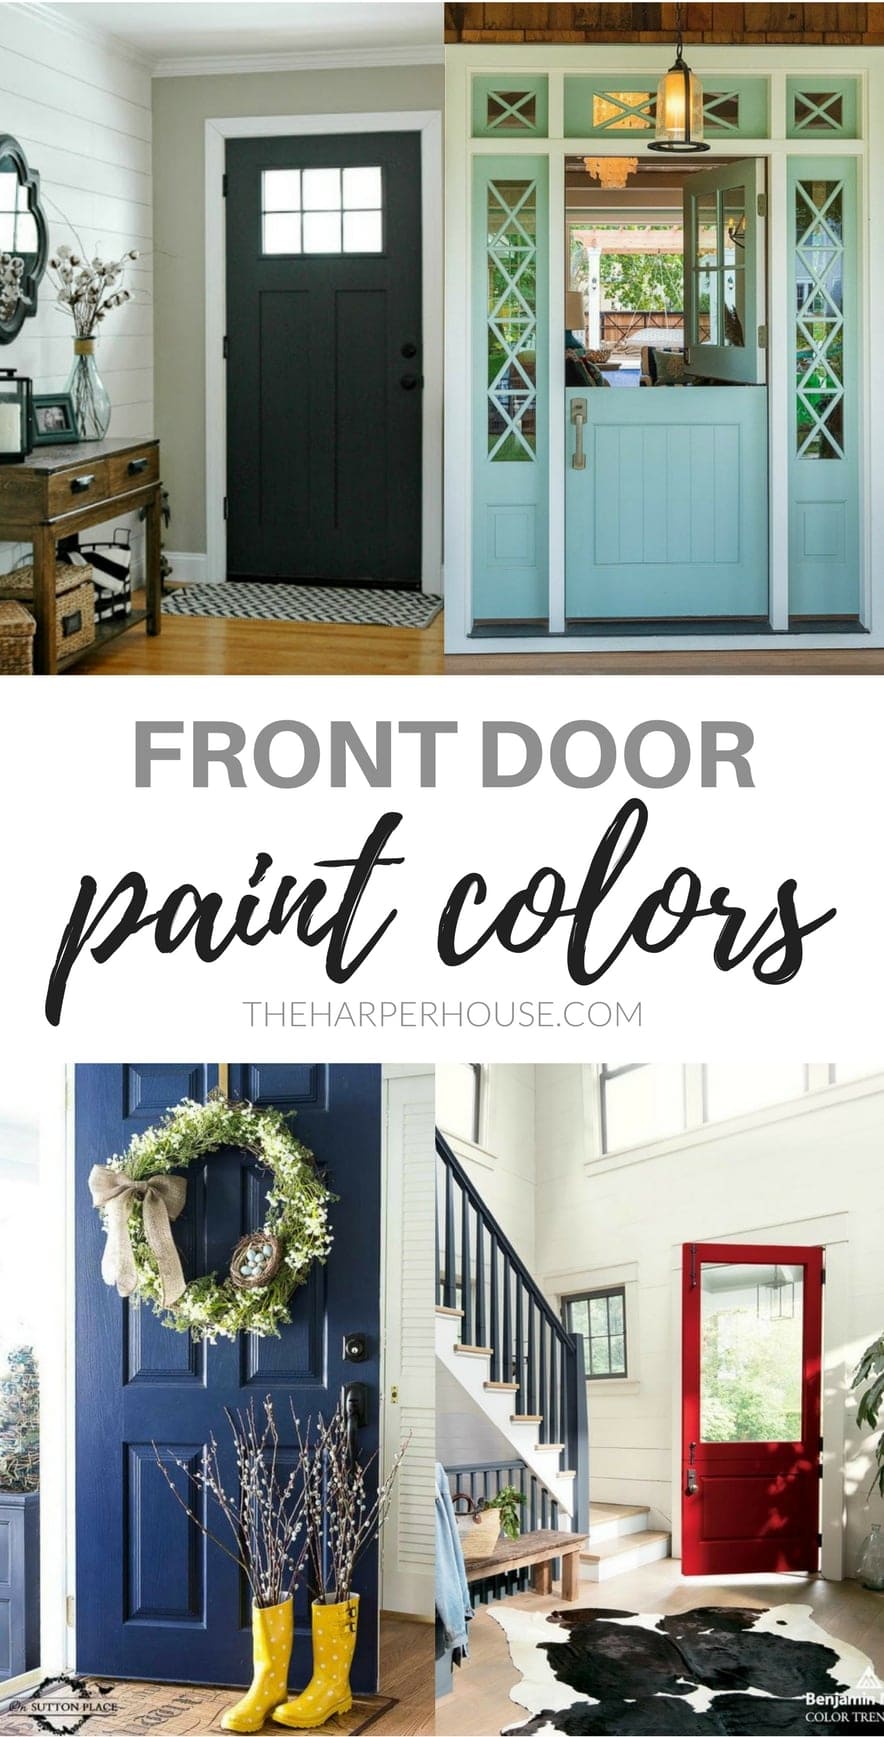 Choose from my top picks for popular front door paint colors for 2018. Add curb appeal with a quick, easy, and inexpensive update and a fresh coat of paint.